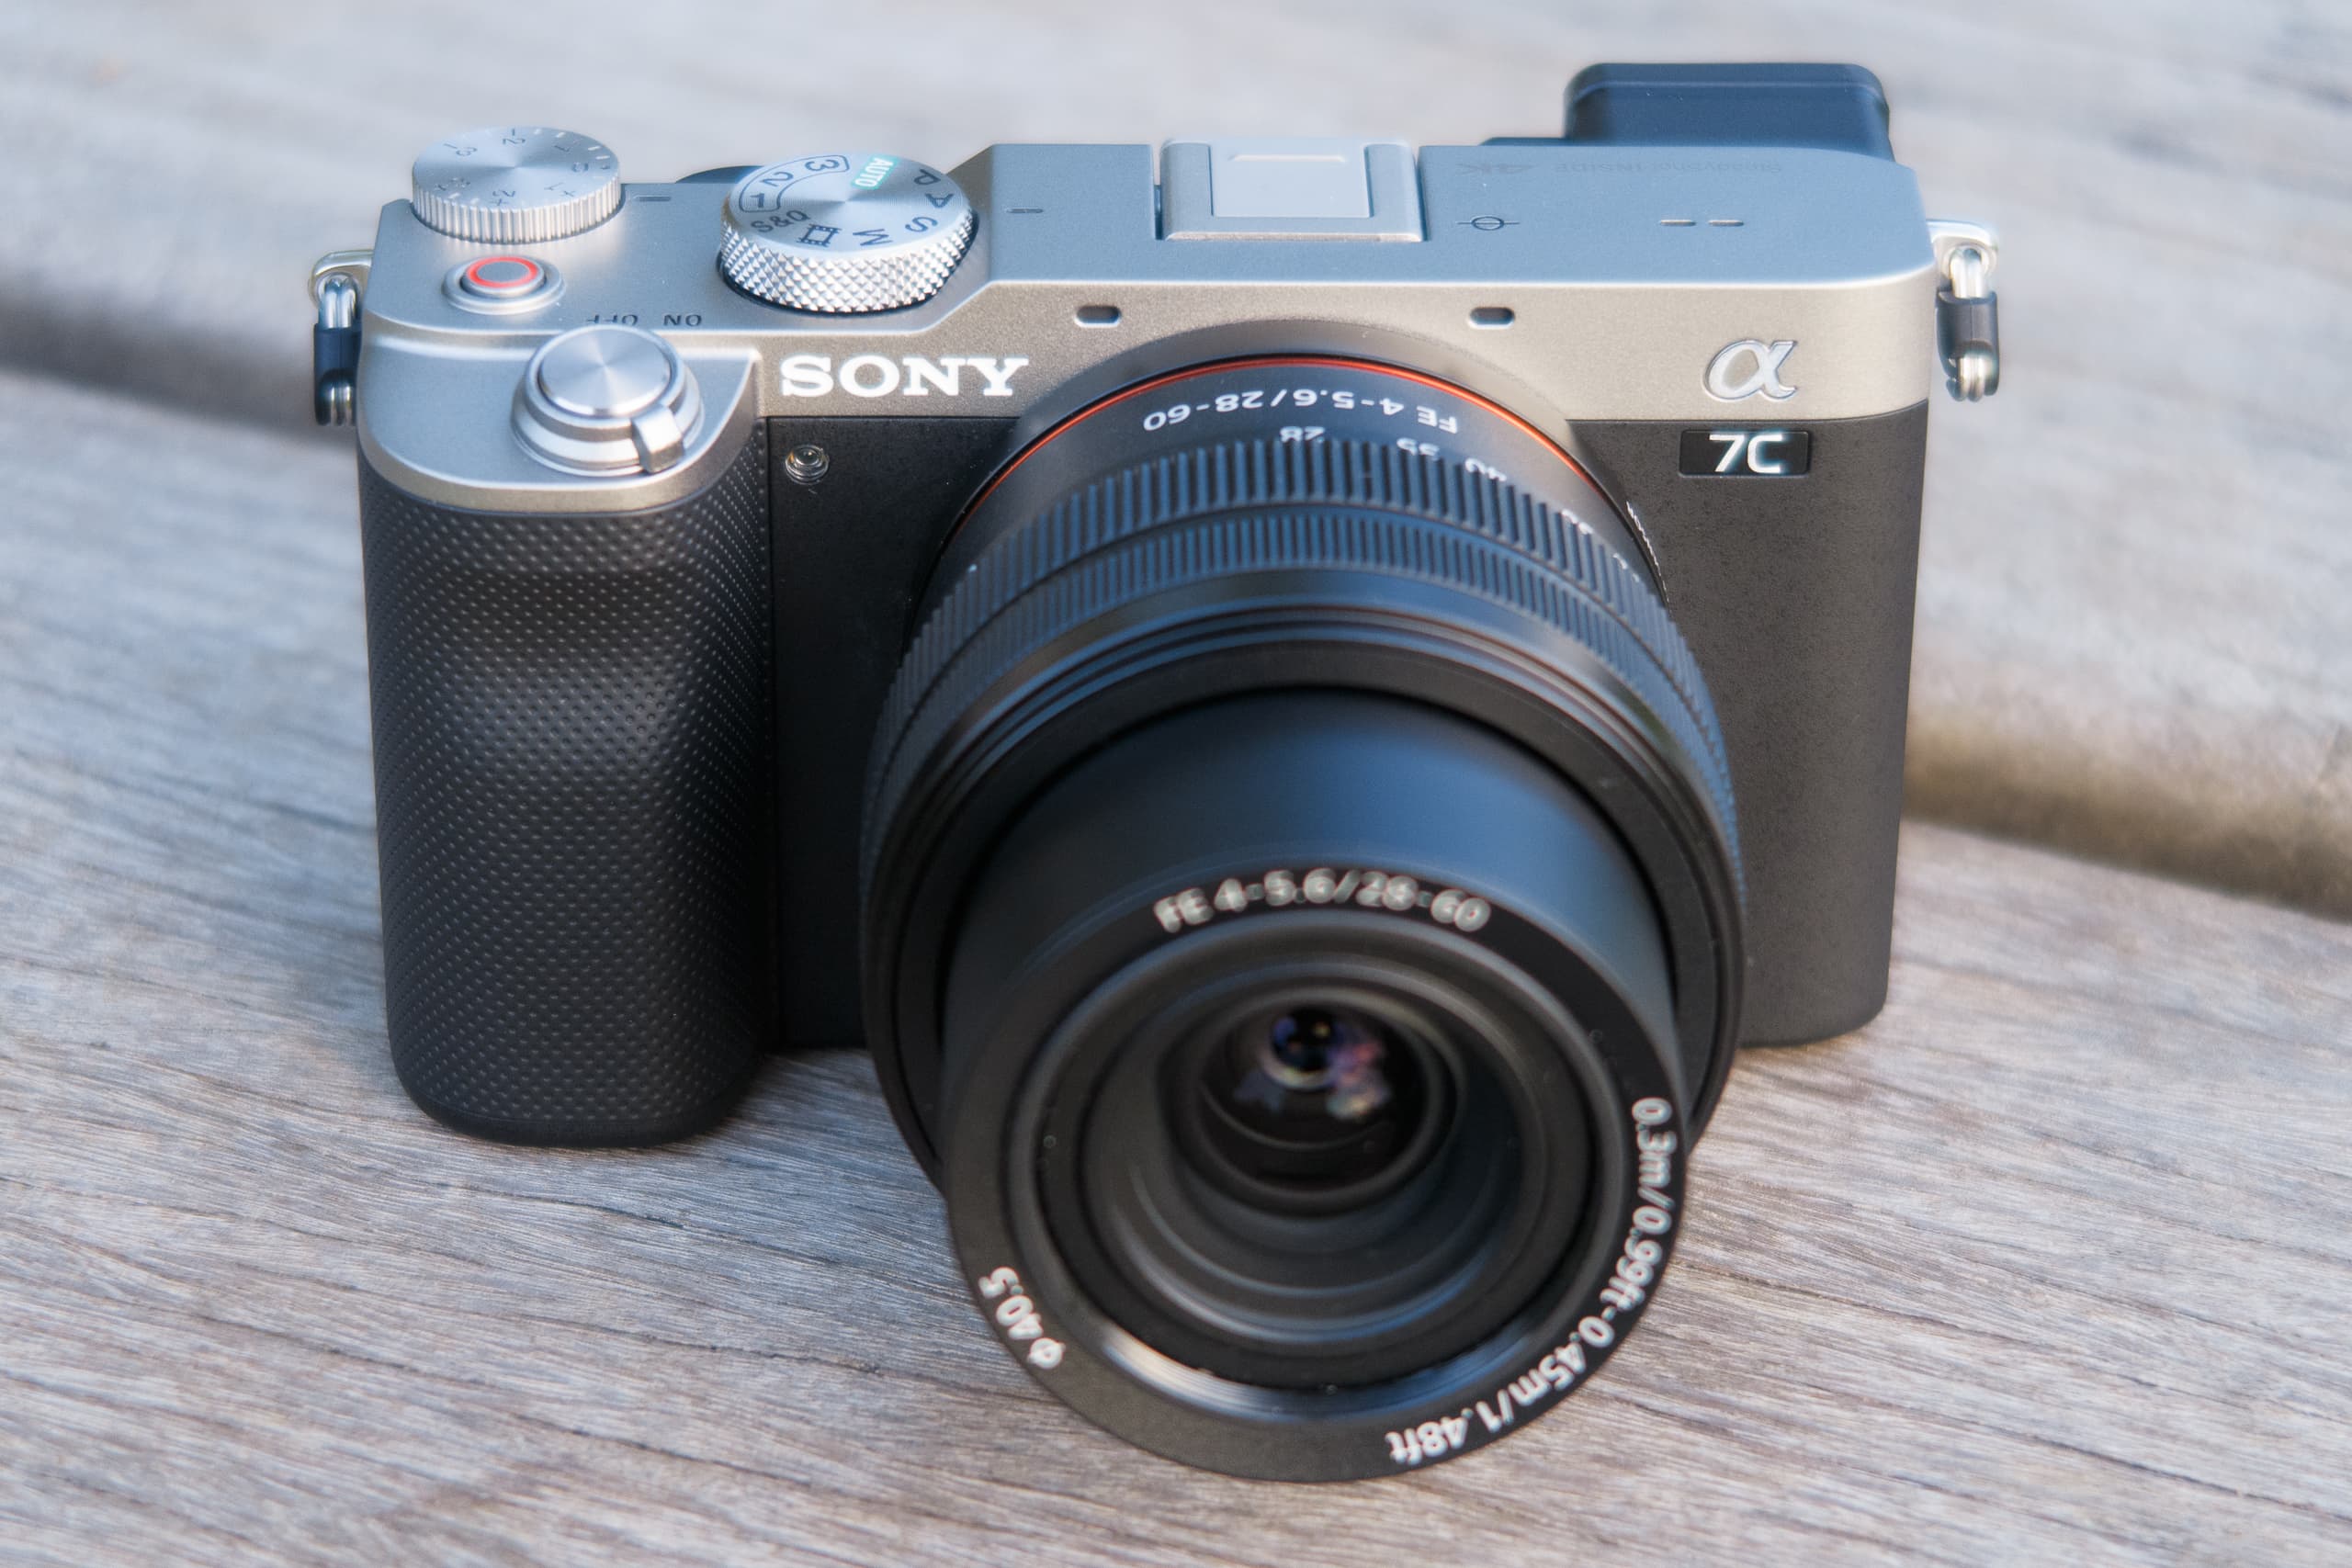 Sony A7C Review  Read This Before You Buy It!